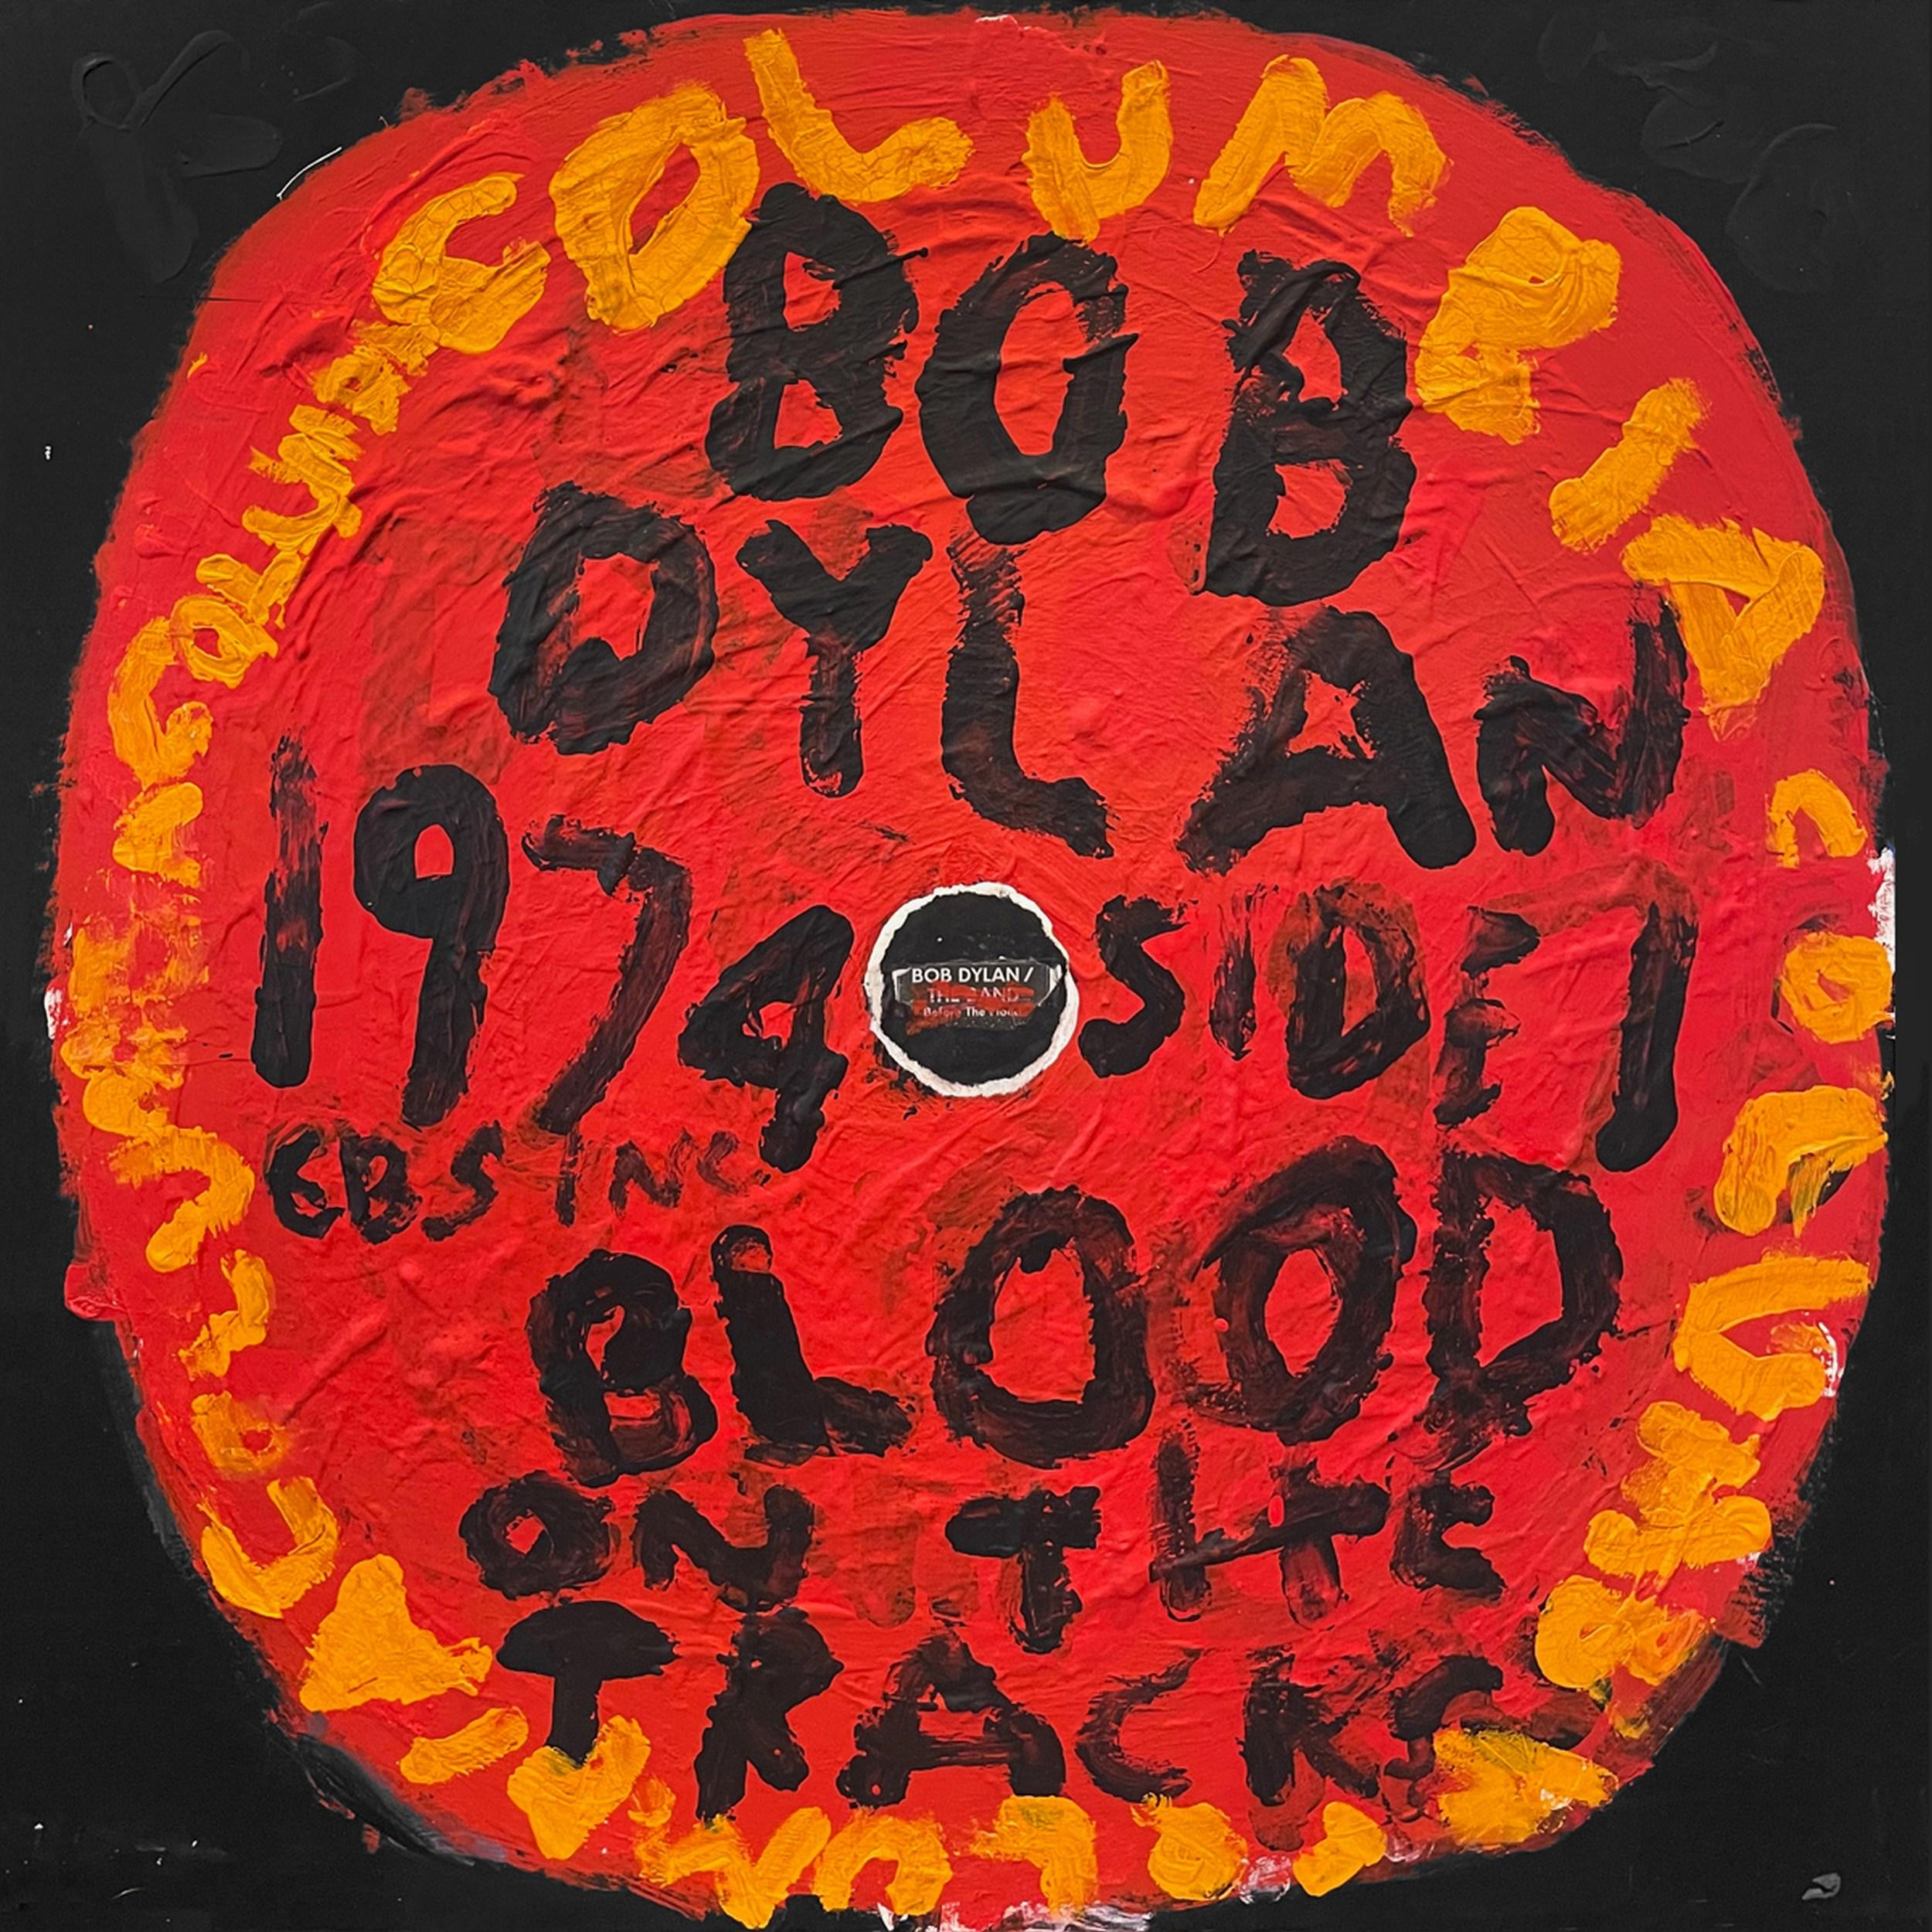 Kerry Smith Abstract Painting - Bob Dylan - Blood On The Tracks (Grammy, Album Art, Iconic, Folk Music, Rock)